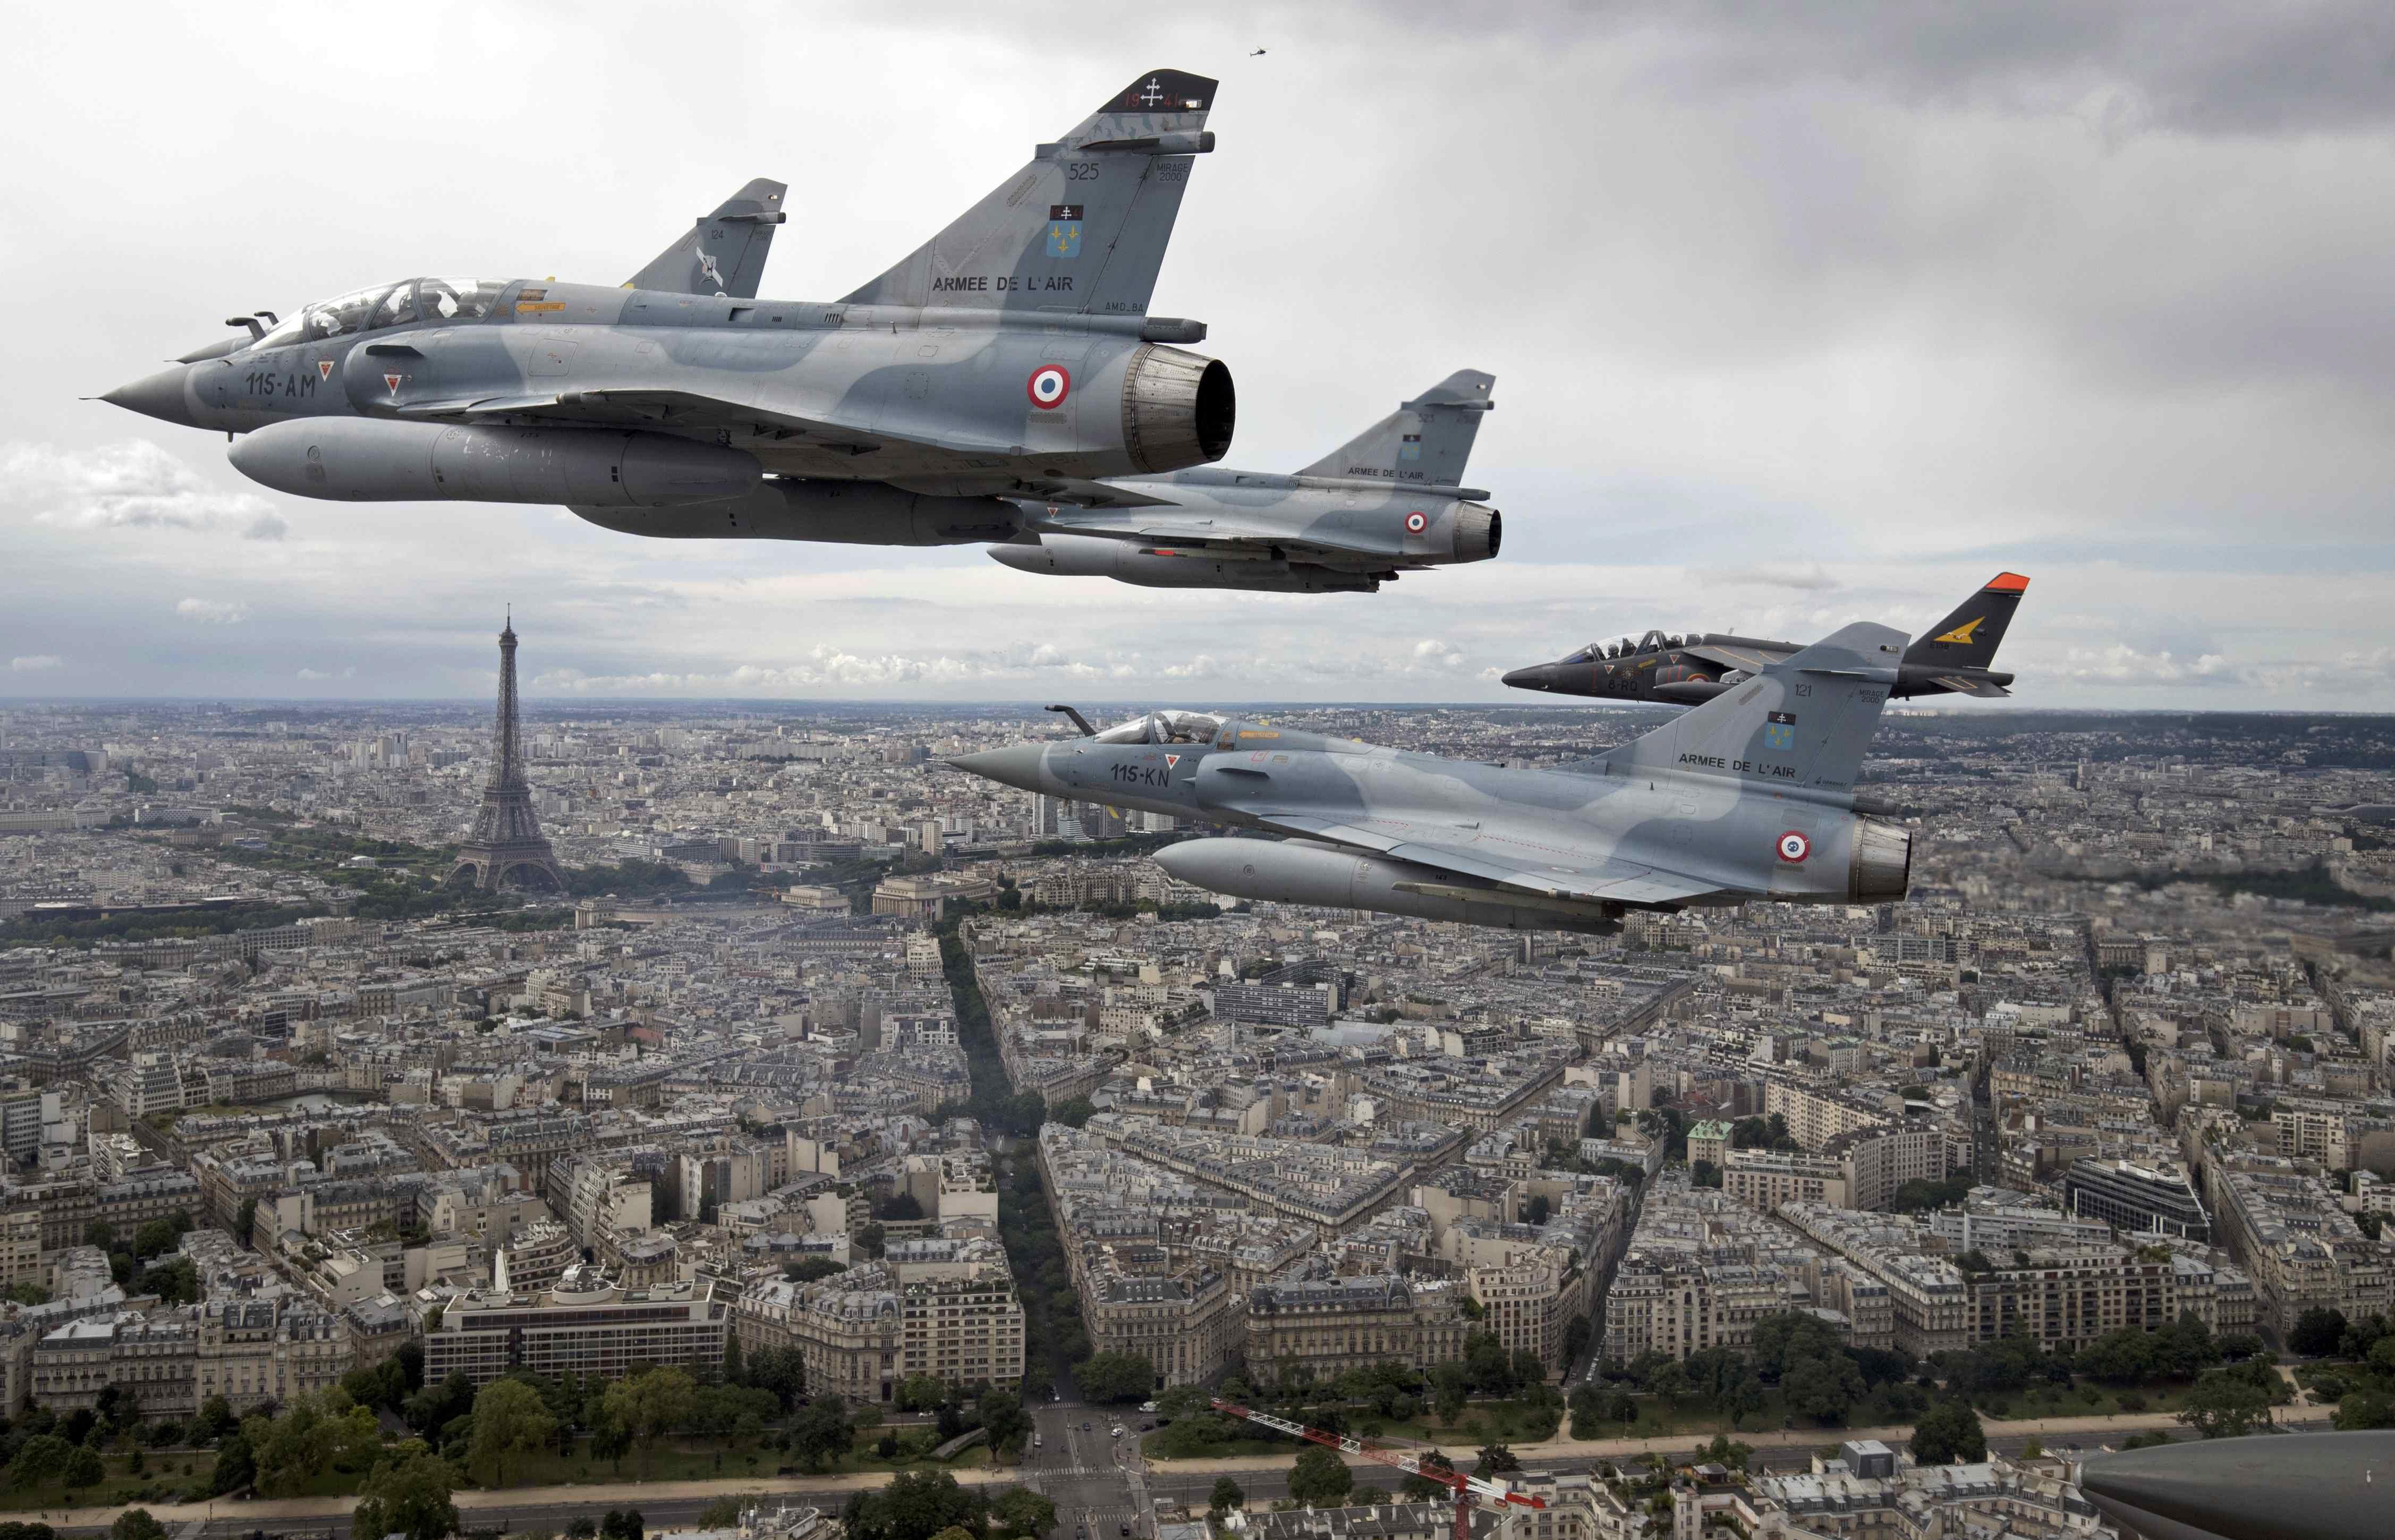 Four Mirage 2000C and one Alpha jet flight over Paris on their way to participate in the Bastille Da